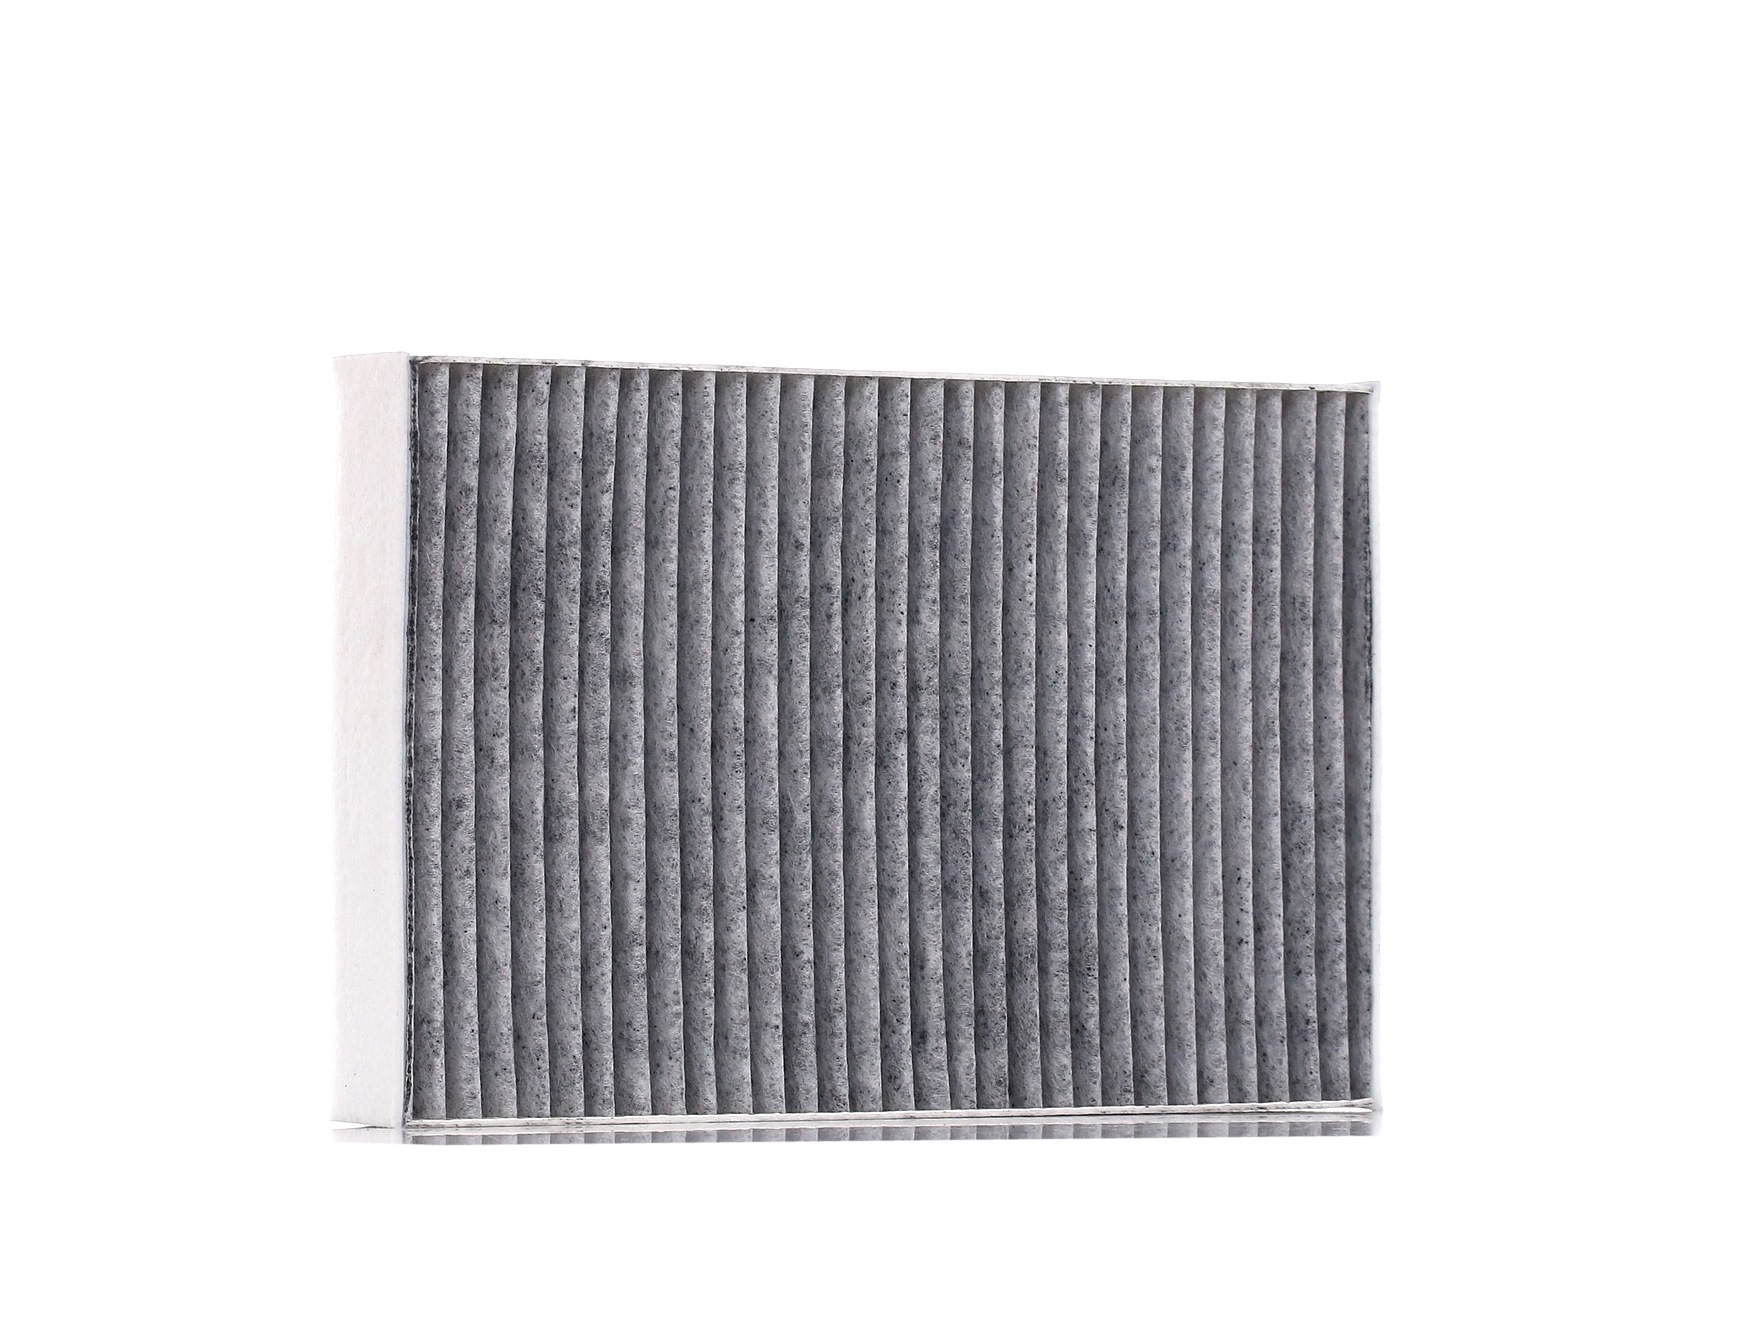 MANN-FILTER Activated Carbon Filter, 244 mm x 157 mm x 30 mm Width: 157mm, Height: 30mm, Length: 244mm Cabin filter CUK 25 044 buy